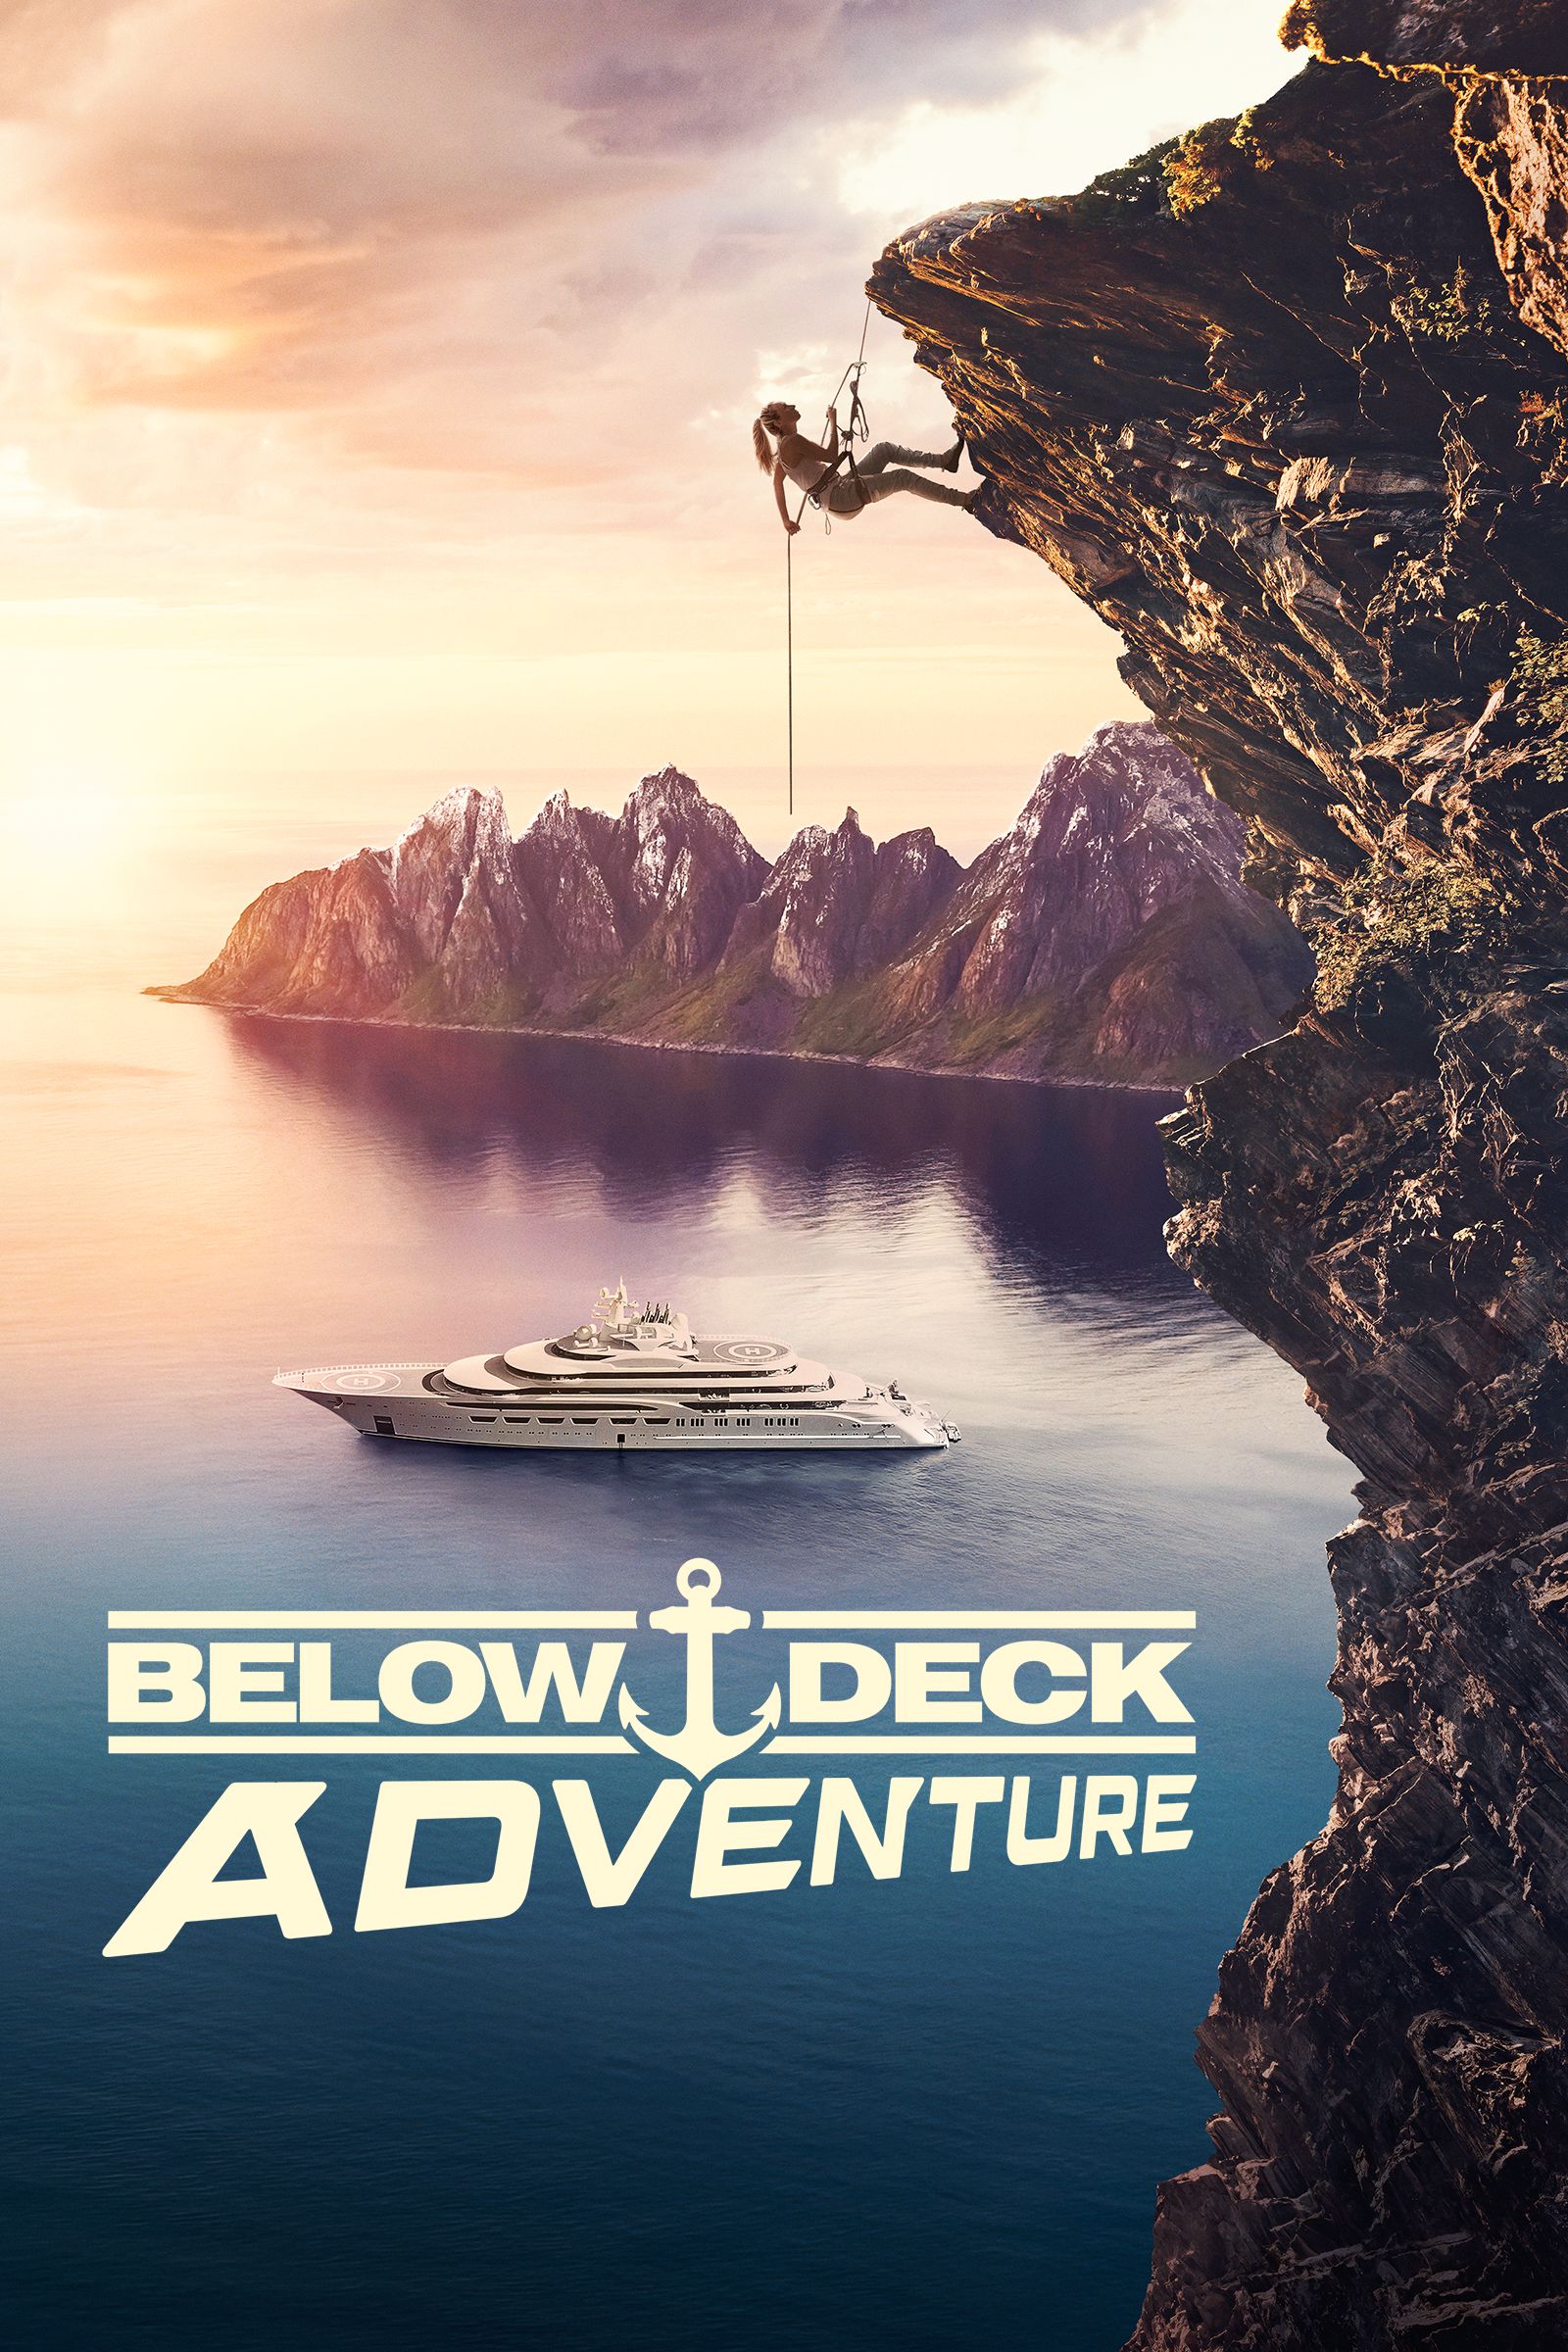 Below Deck Adventure - Where to Watch and Stream